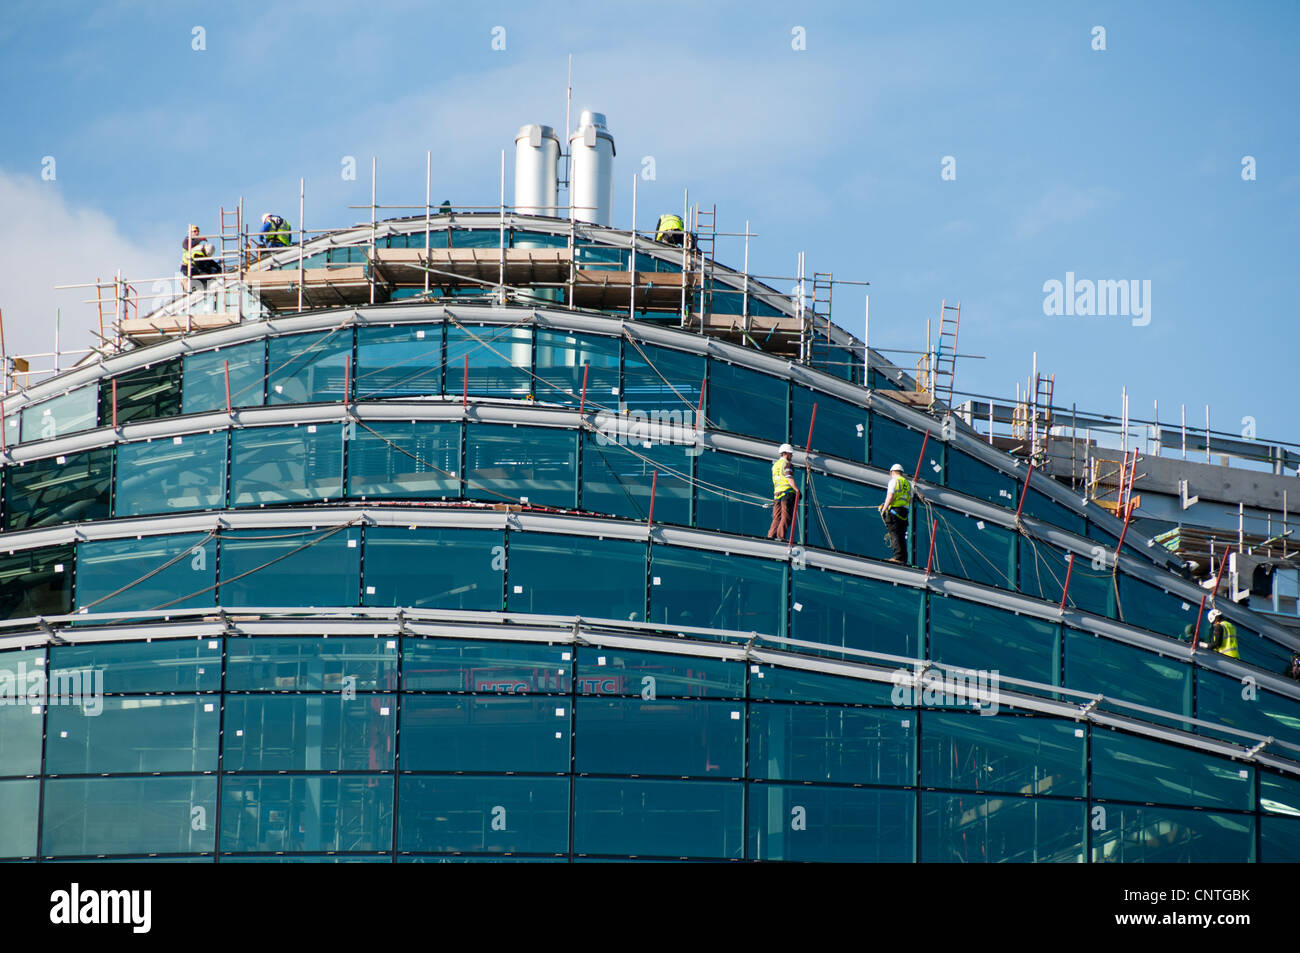 The Co-operative Group headquarters, NOMA, under construction 2012.  Miller Street, Manchester, England, UK. Stock Photo